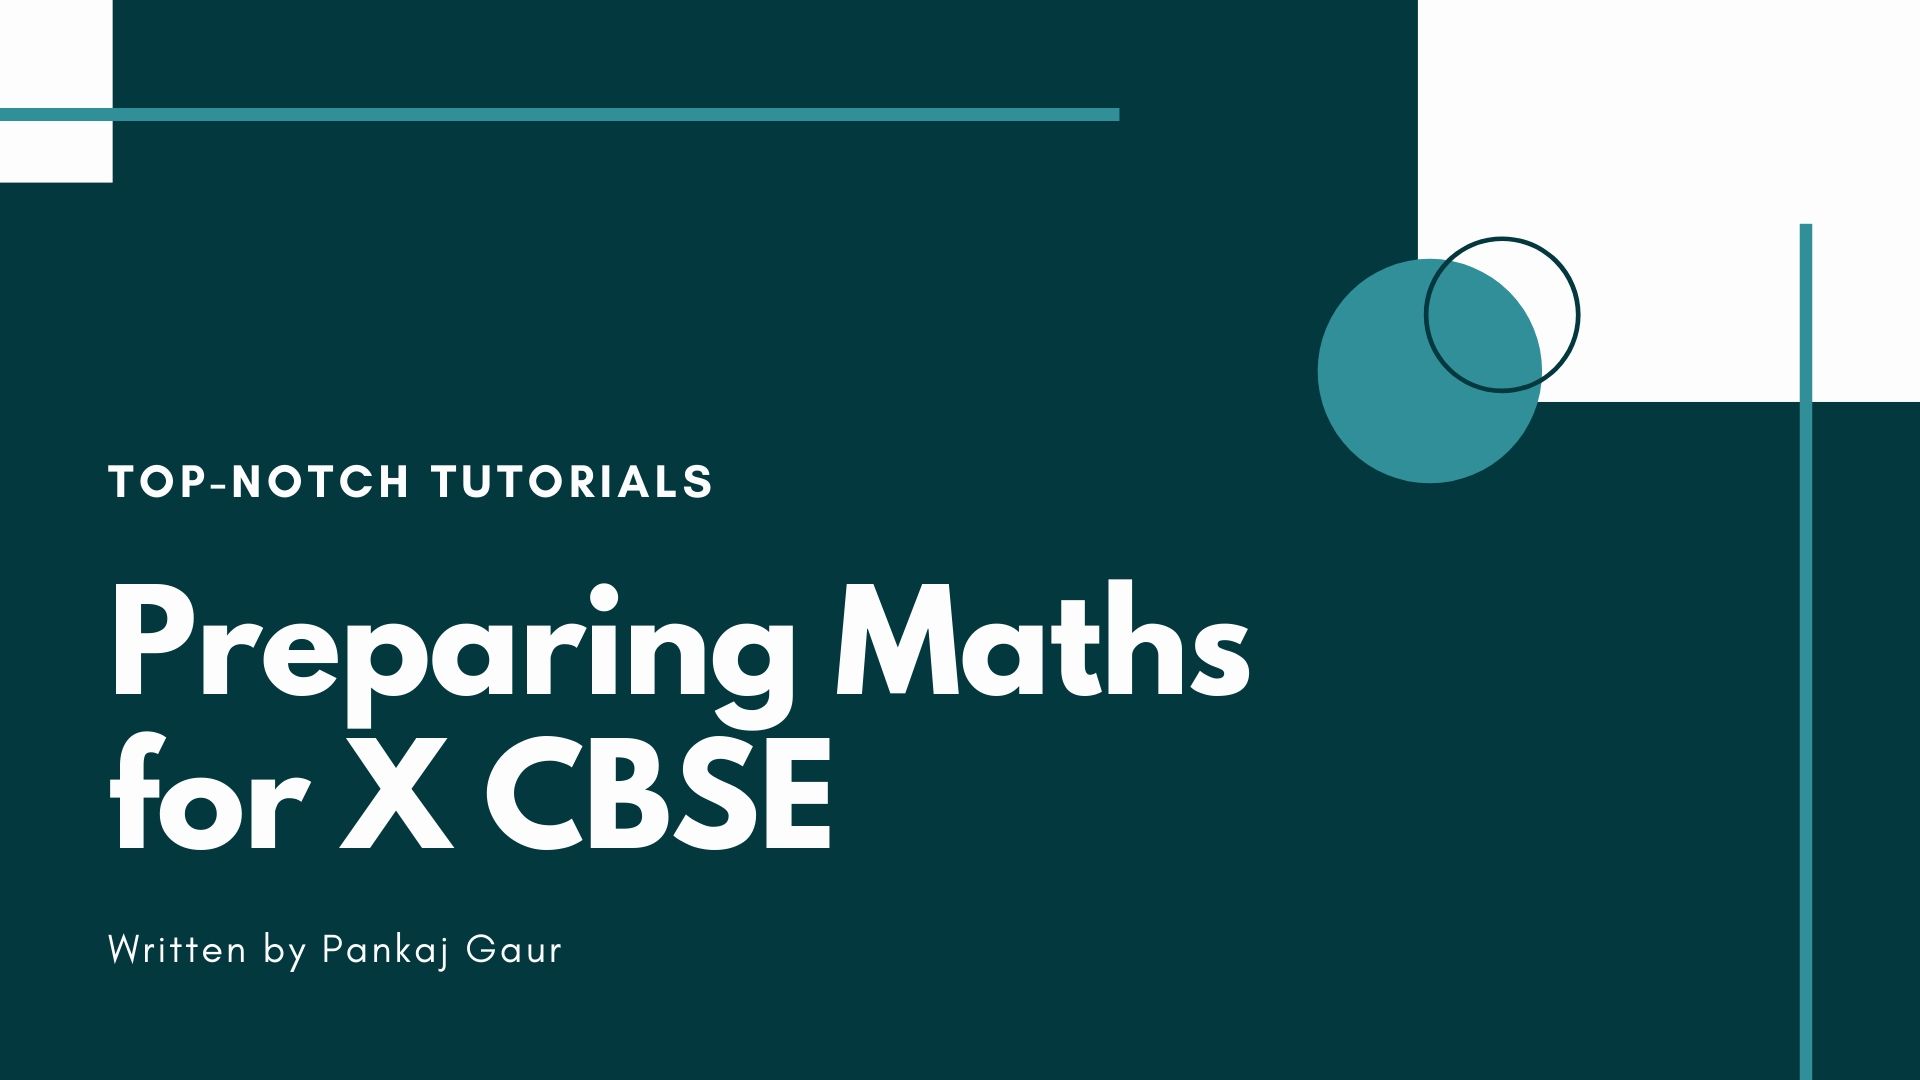 How should I prepare for CBSE class 10th Maths exams?